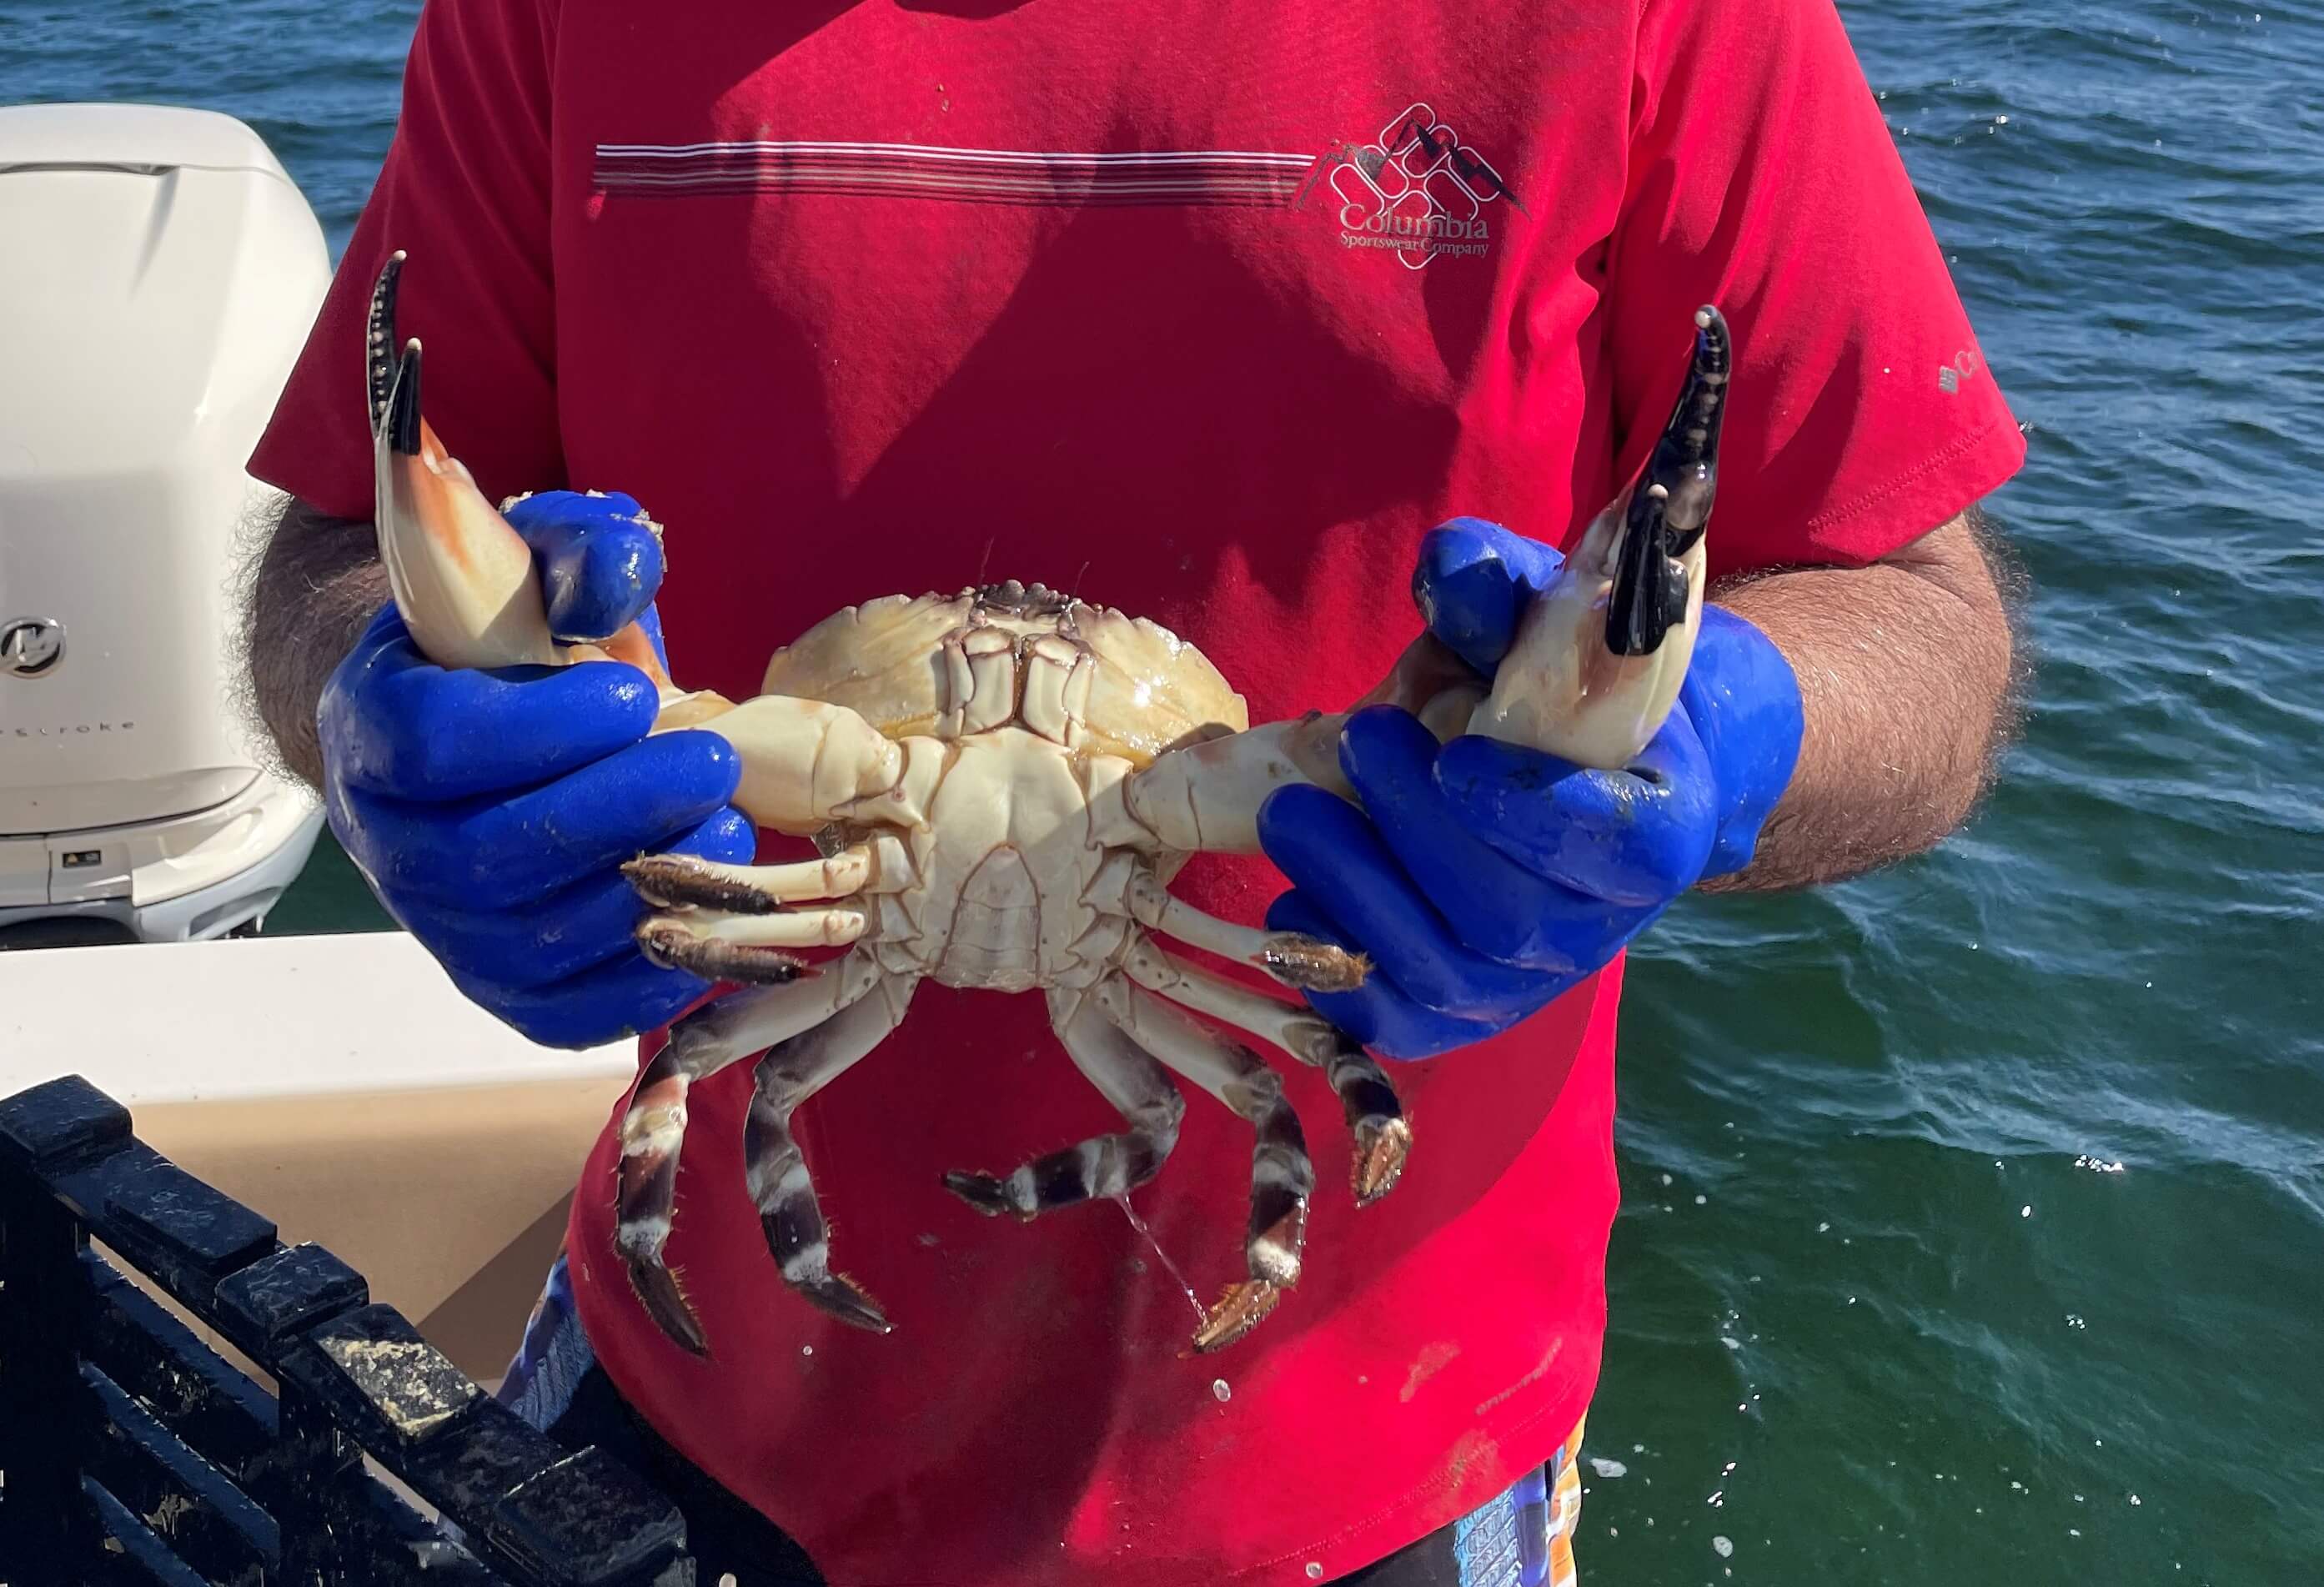 Florida Stone Crab Season 2022-2023 off to a very large start!